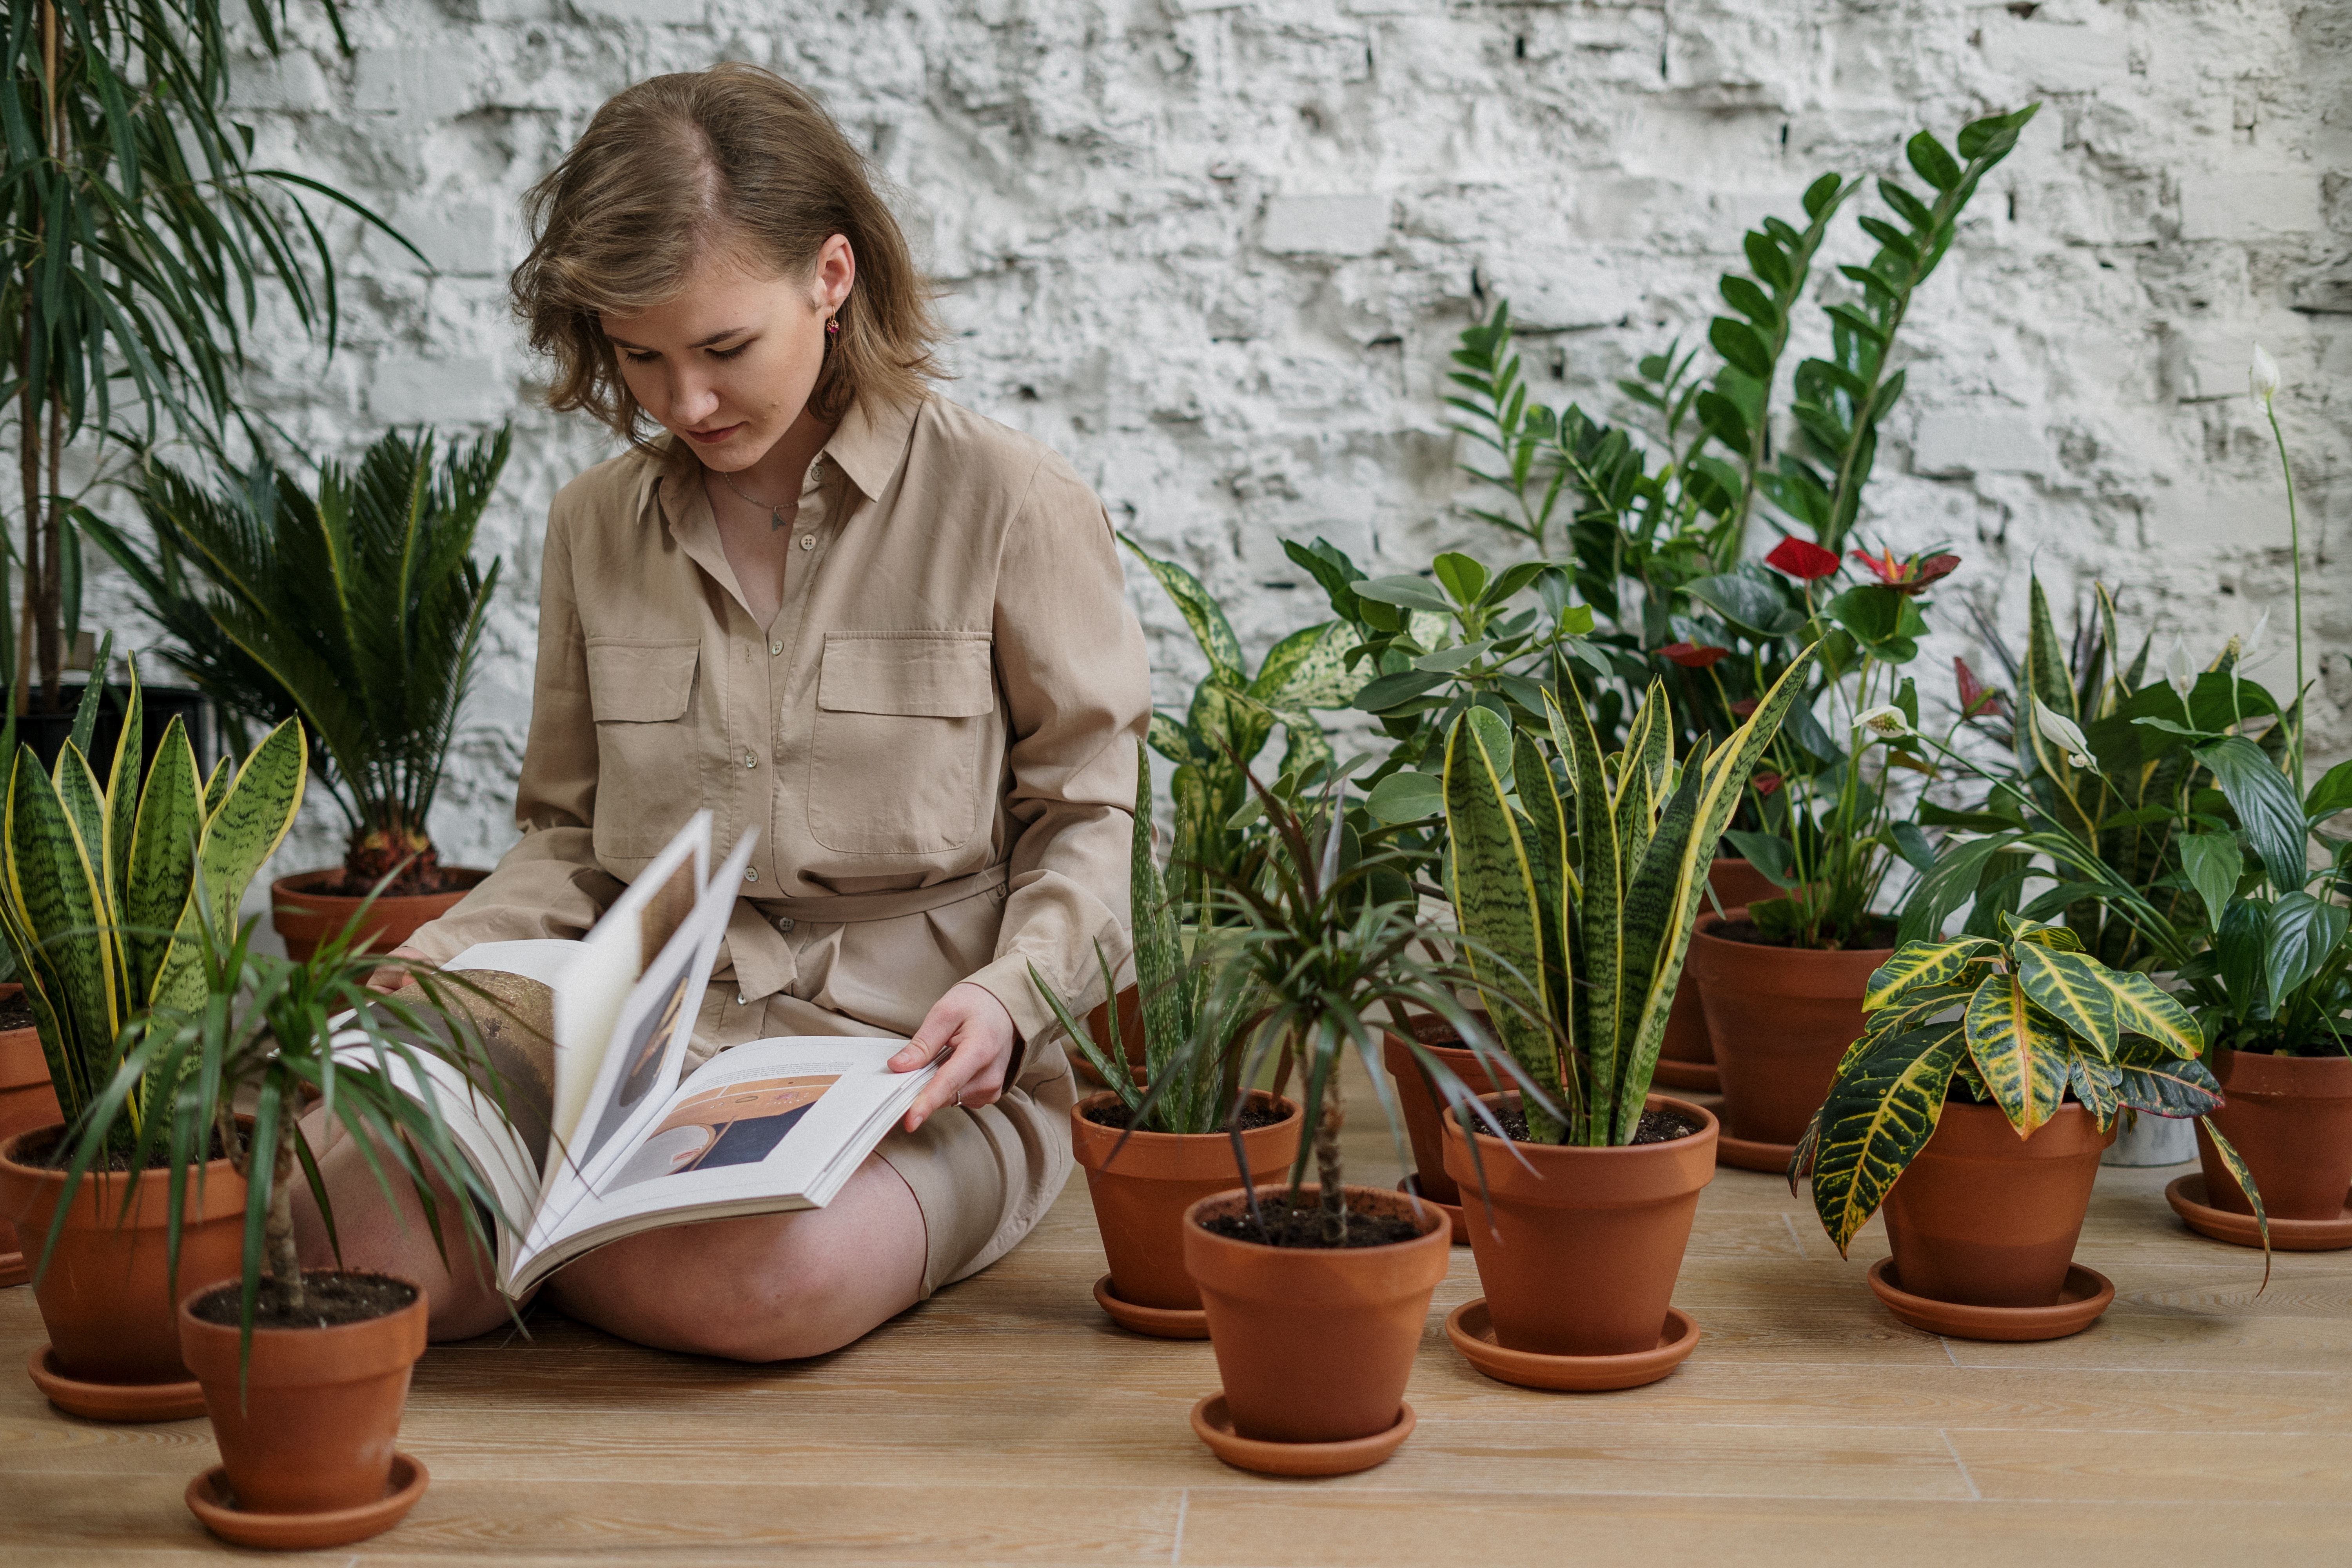 Girl reading a book while she cares for plants